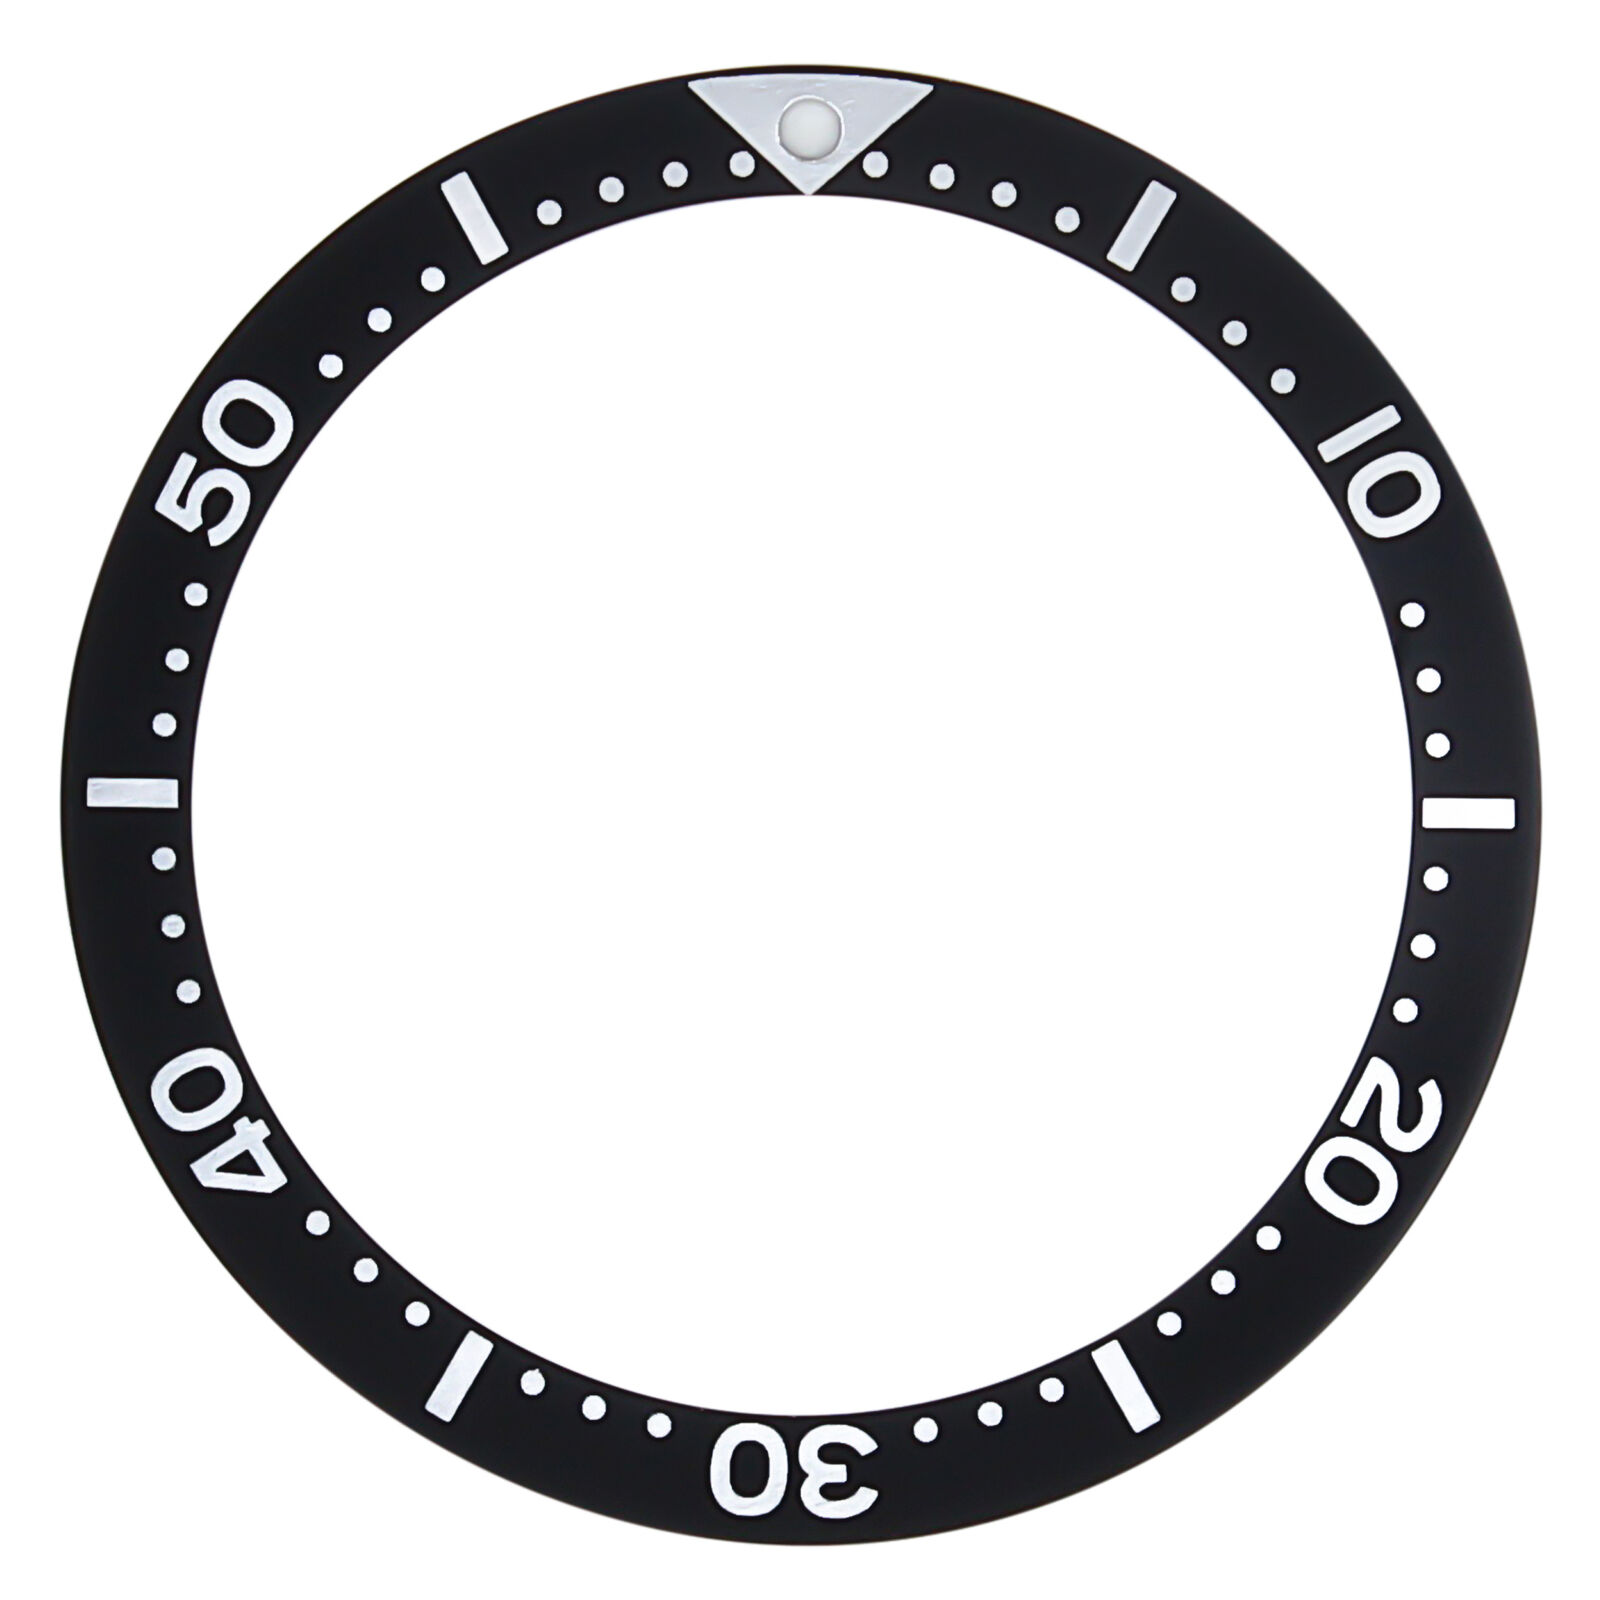 REPLACEMENT BEZEL INSERT FOR SEIKO DIVER WATCH BLACK